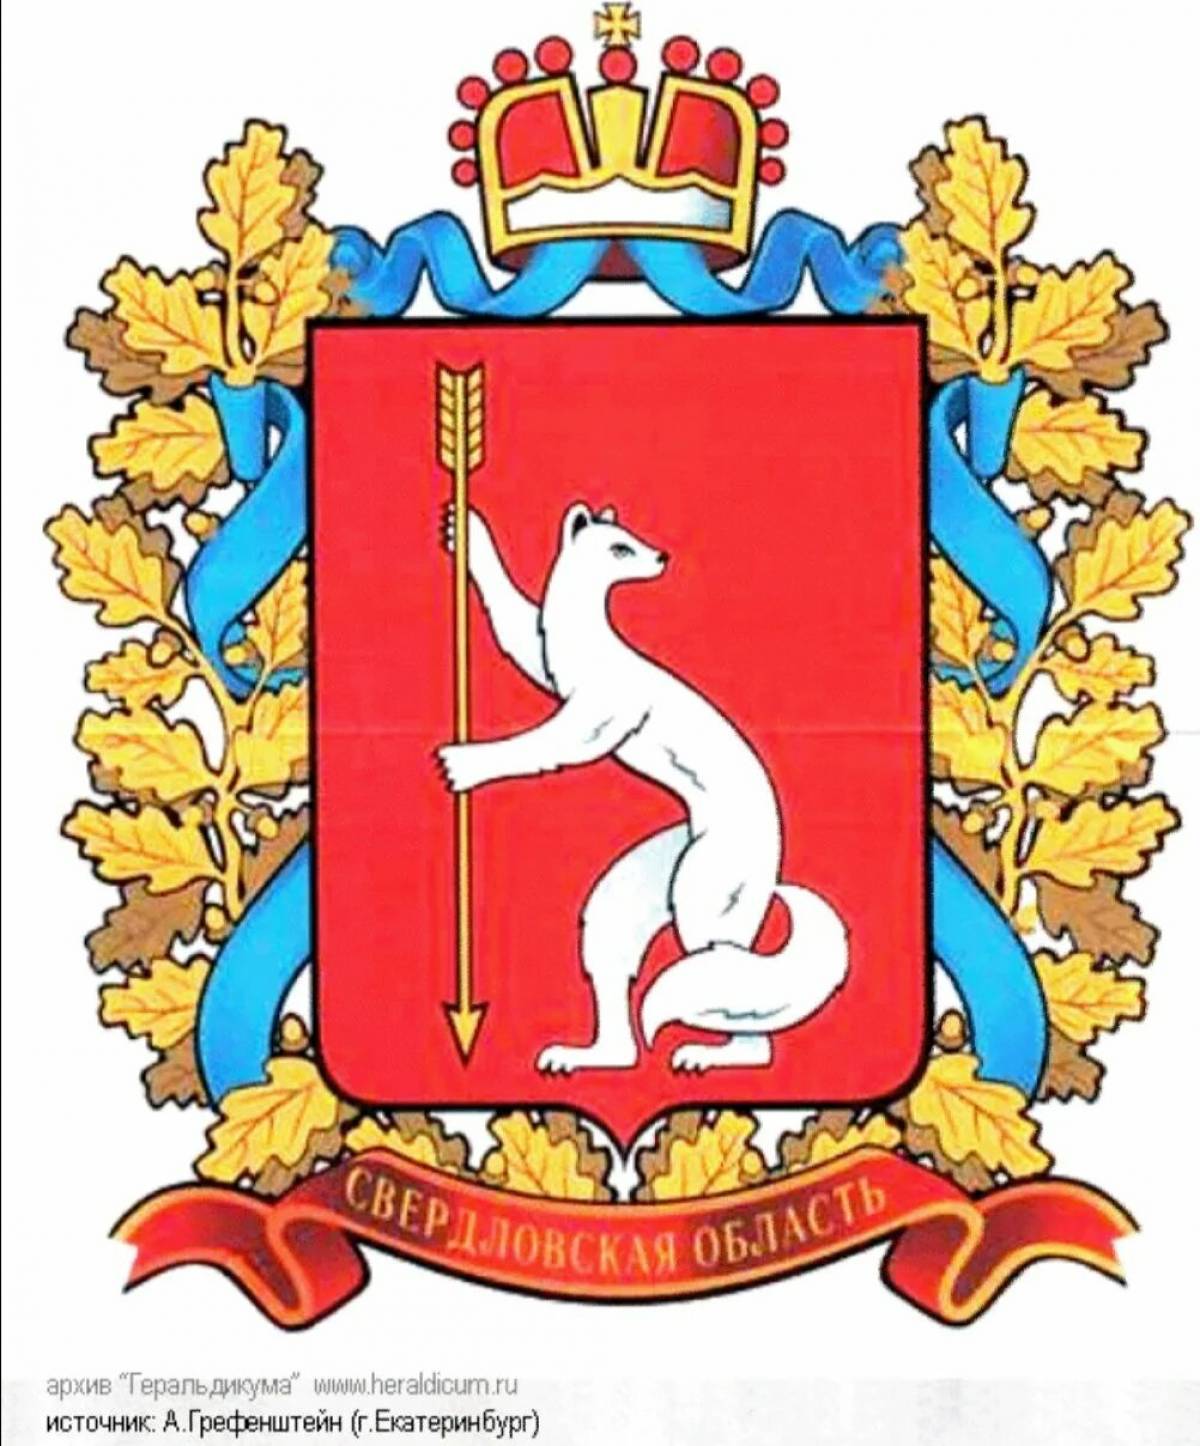 Coat of arms of Yekaterinburg #11